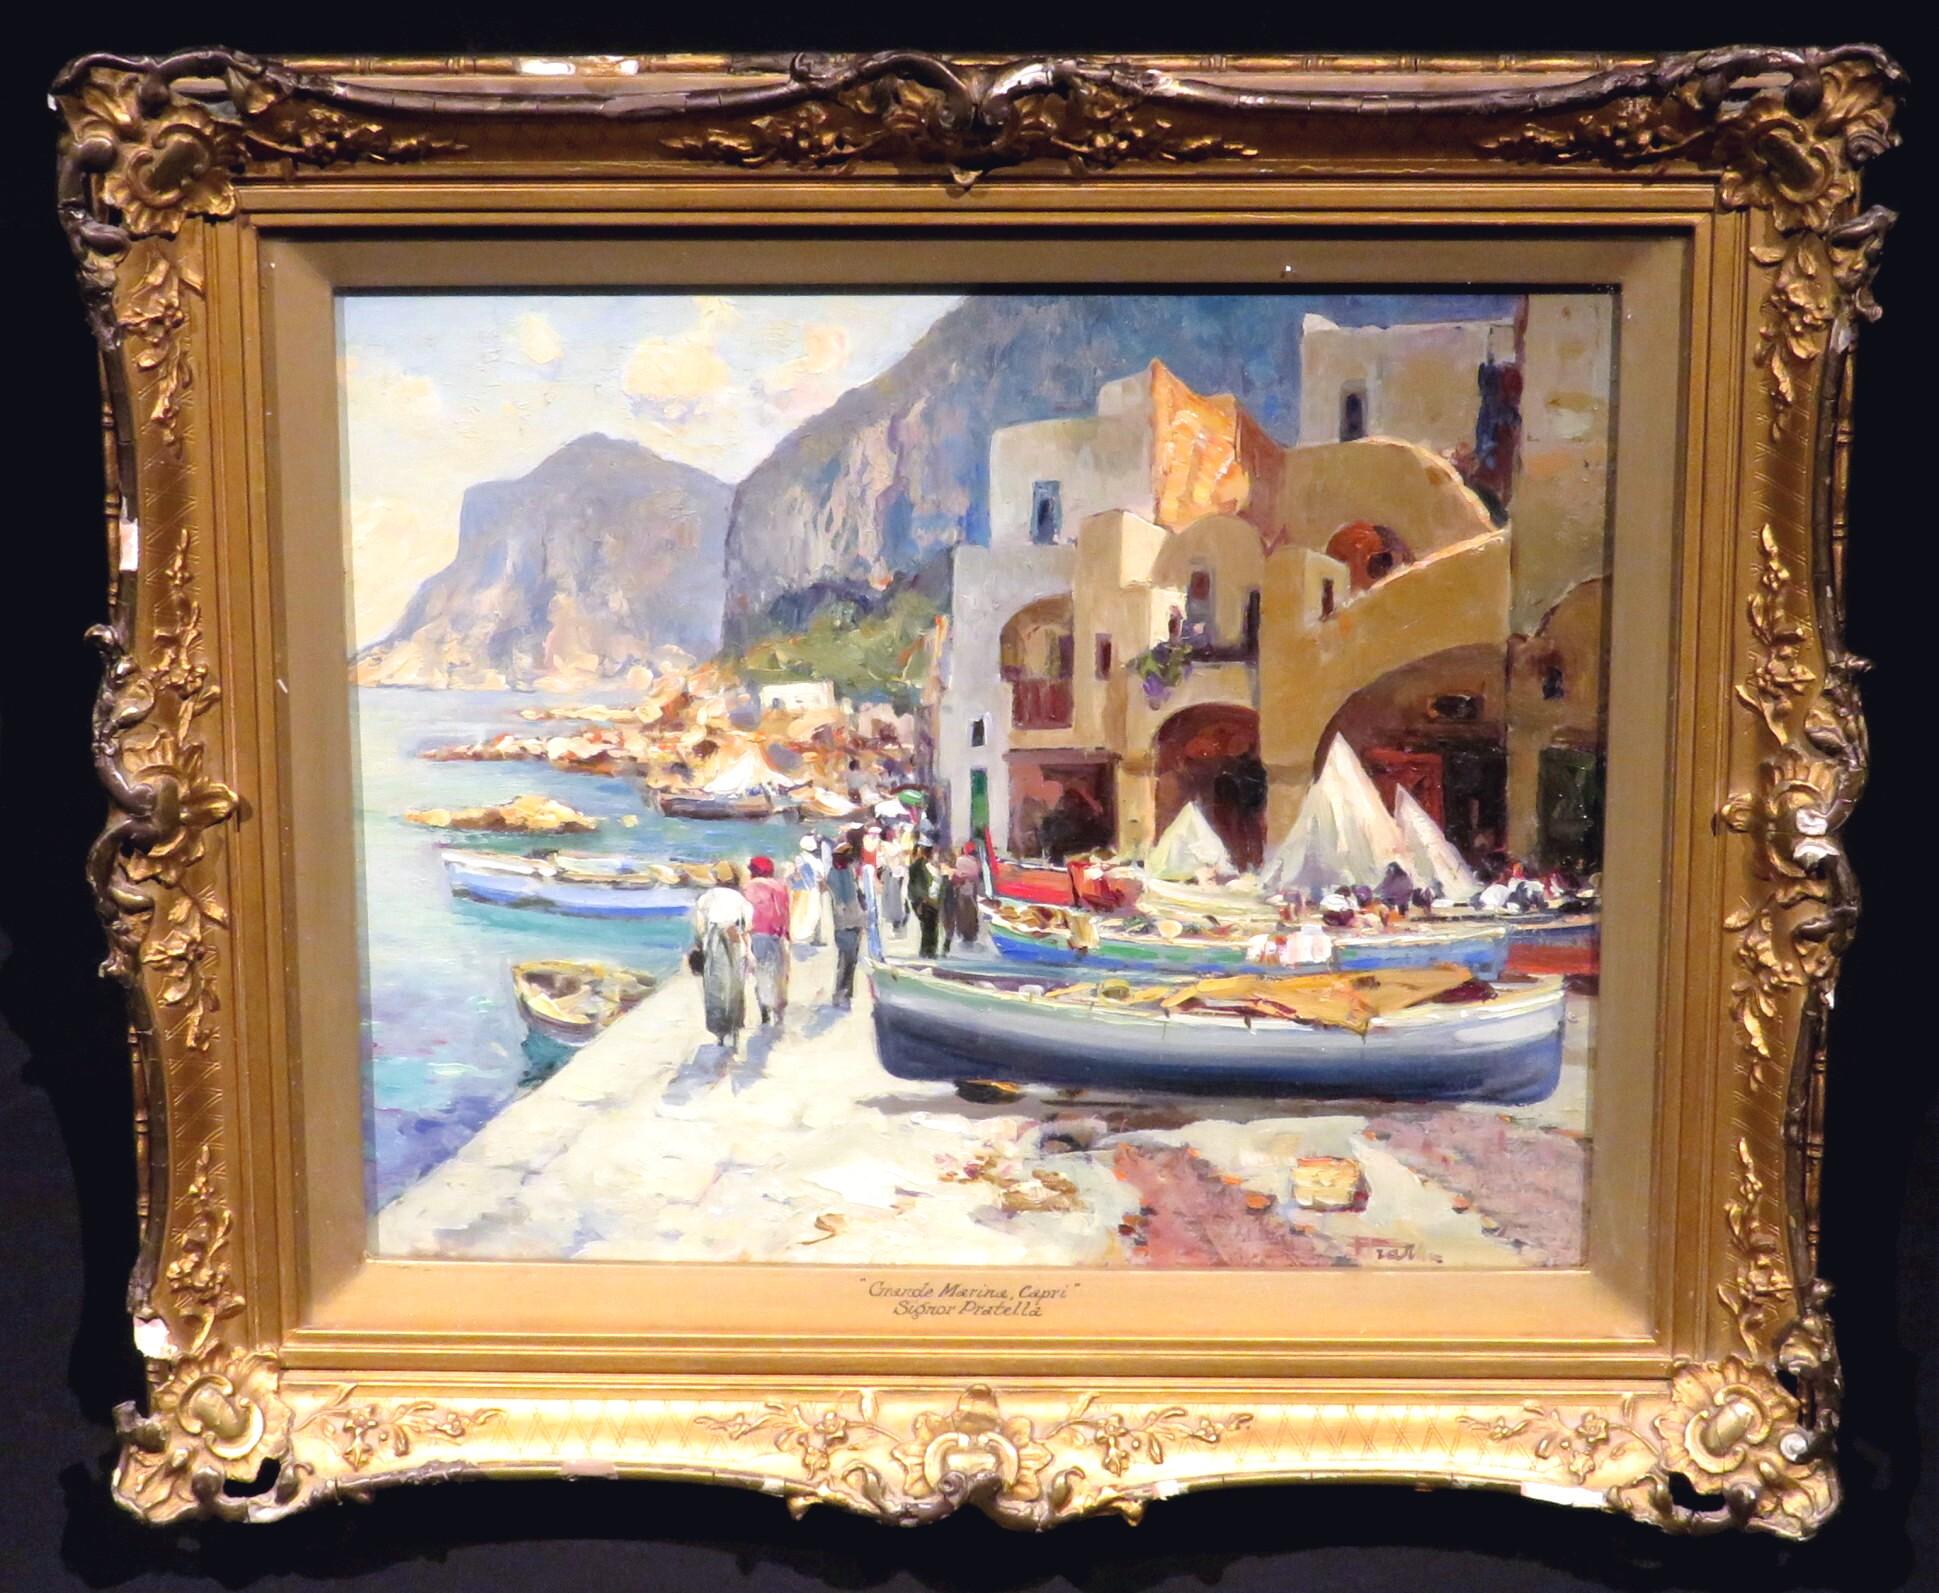 A very charming & finely executed impressionist harbour / coastal view titled 'Grande Marina, Capri' by noted 20th century Italian impressionist artist, Paolo Pratella (1892-1980).
Oil on wood panel, signed bottom right and set within its original